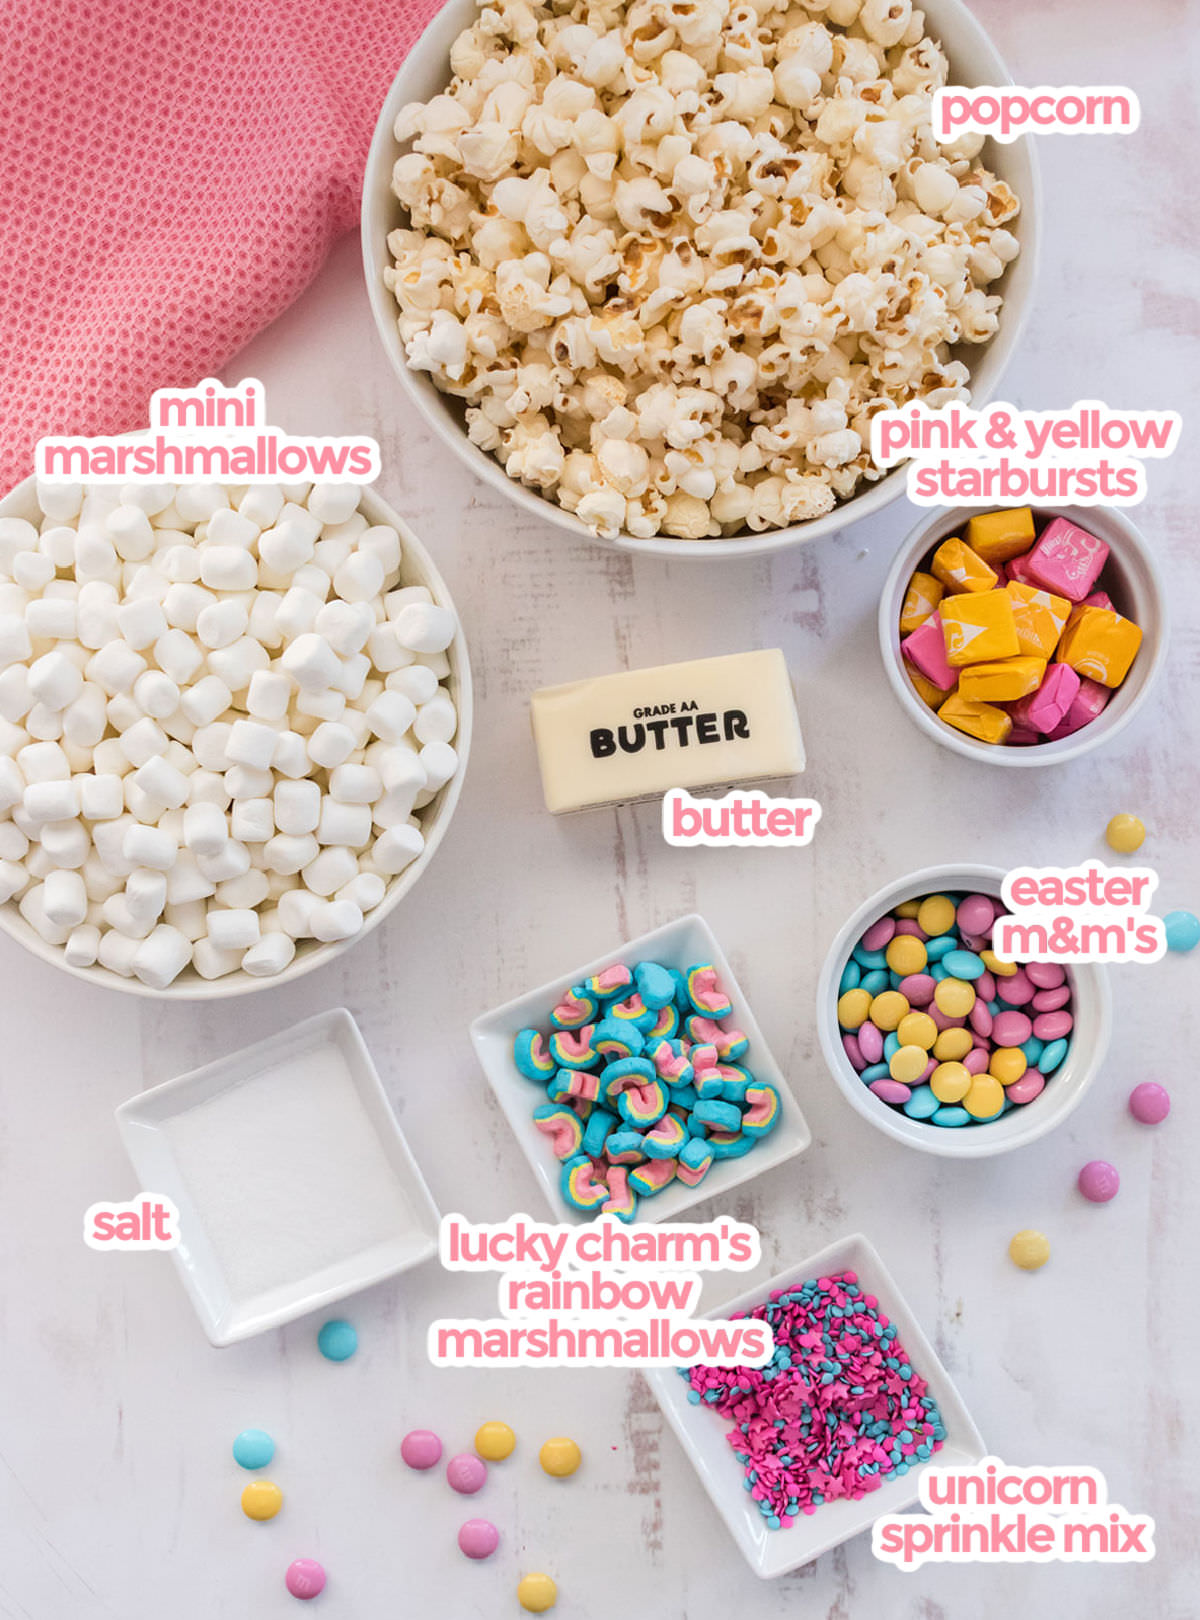 All the ingredients needs to make Unicorn Popcorn including popcorn,  marshmallows, starburst candies, butter, M&M's, sprinkles, rainbow marshmallows and salt. 